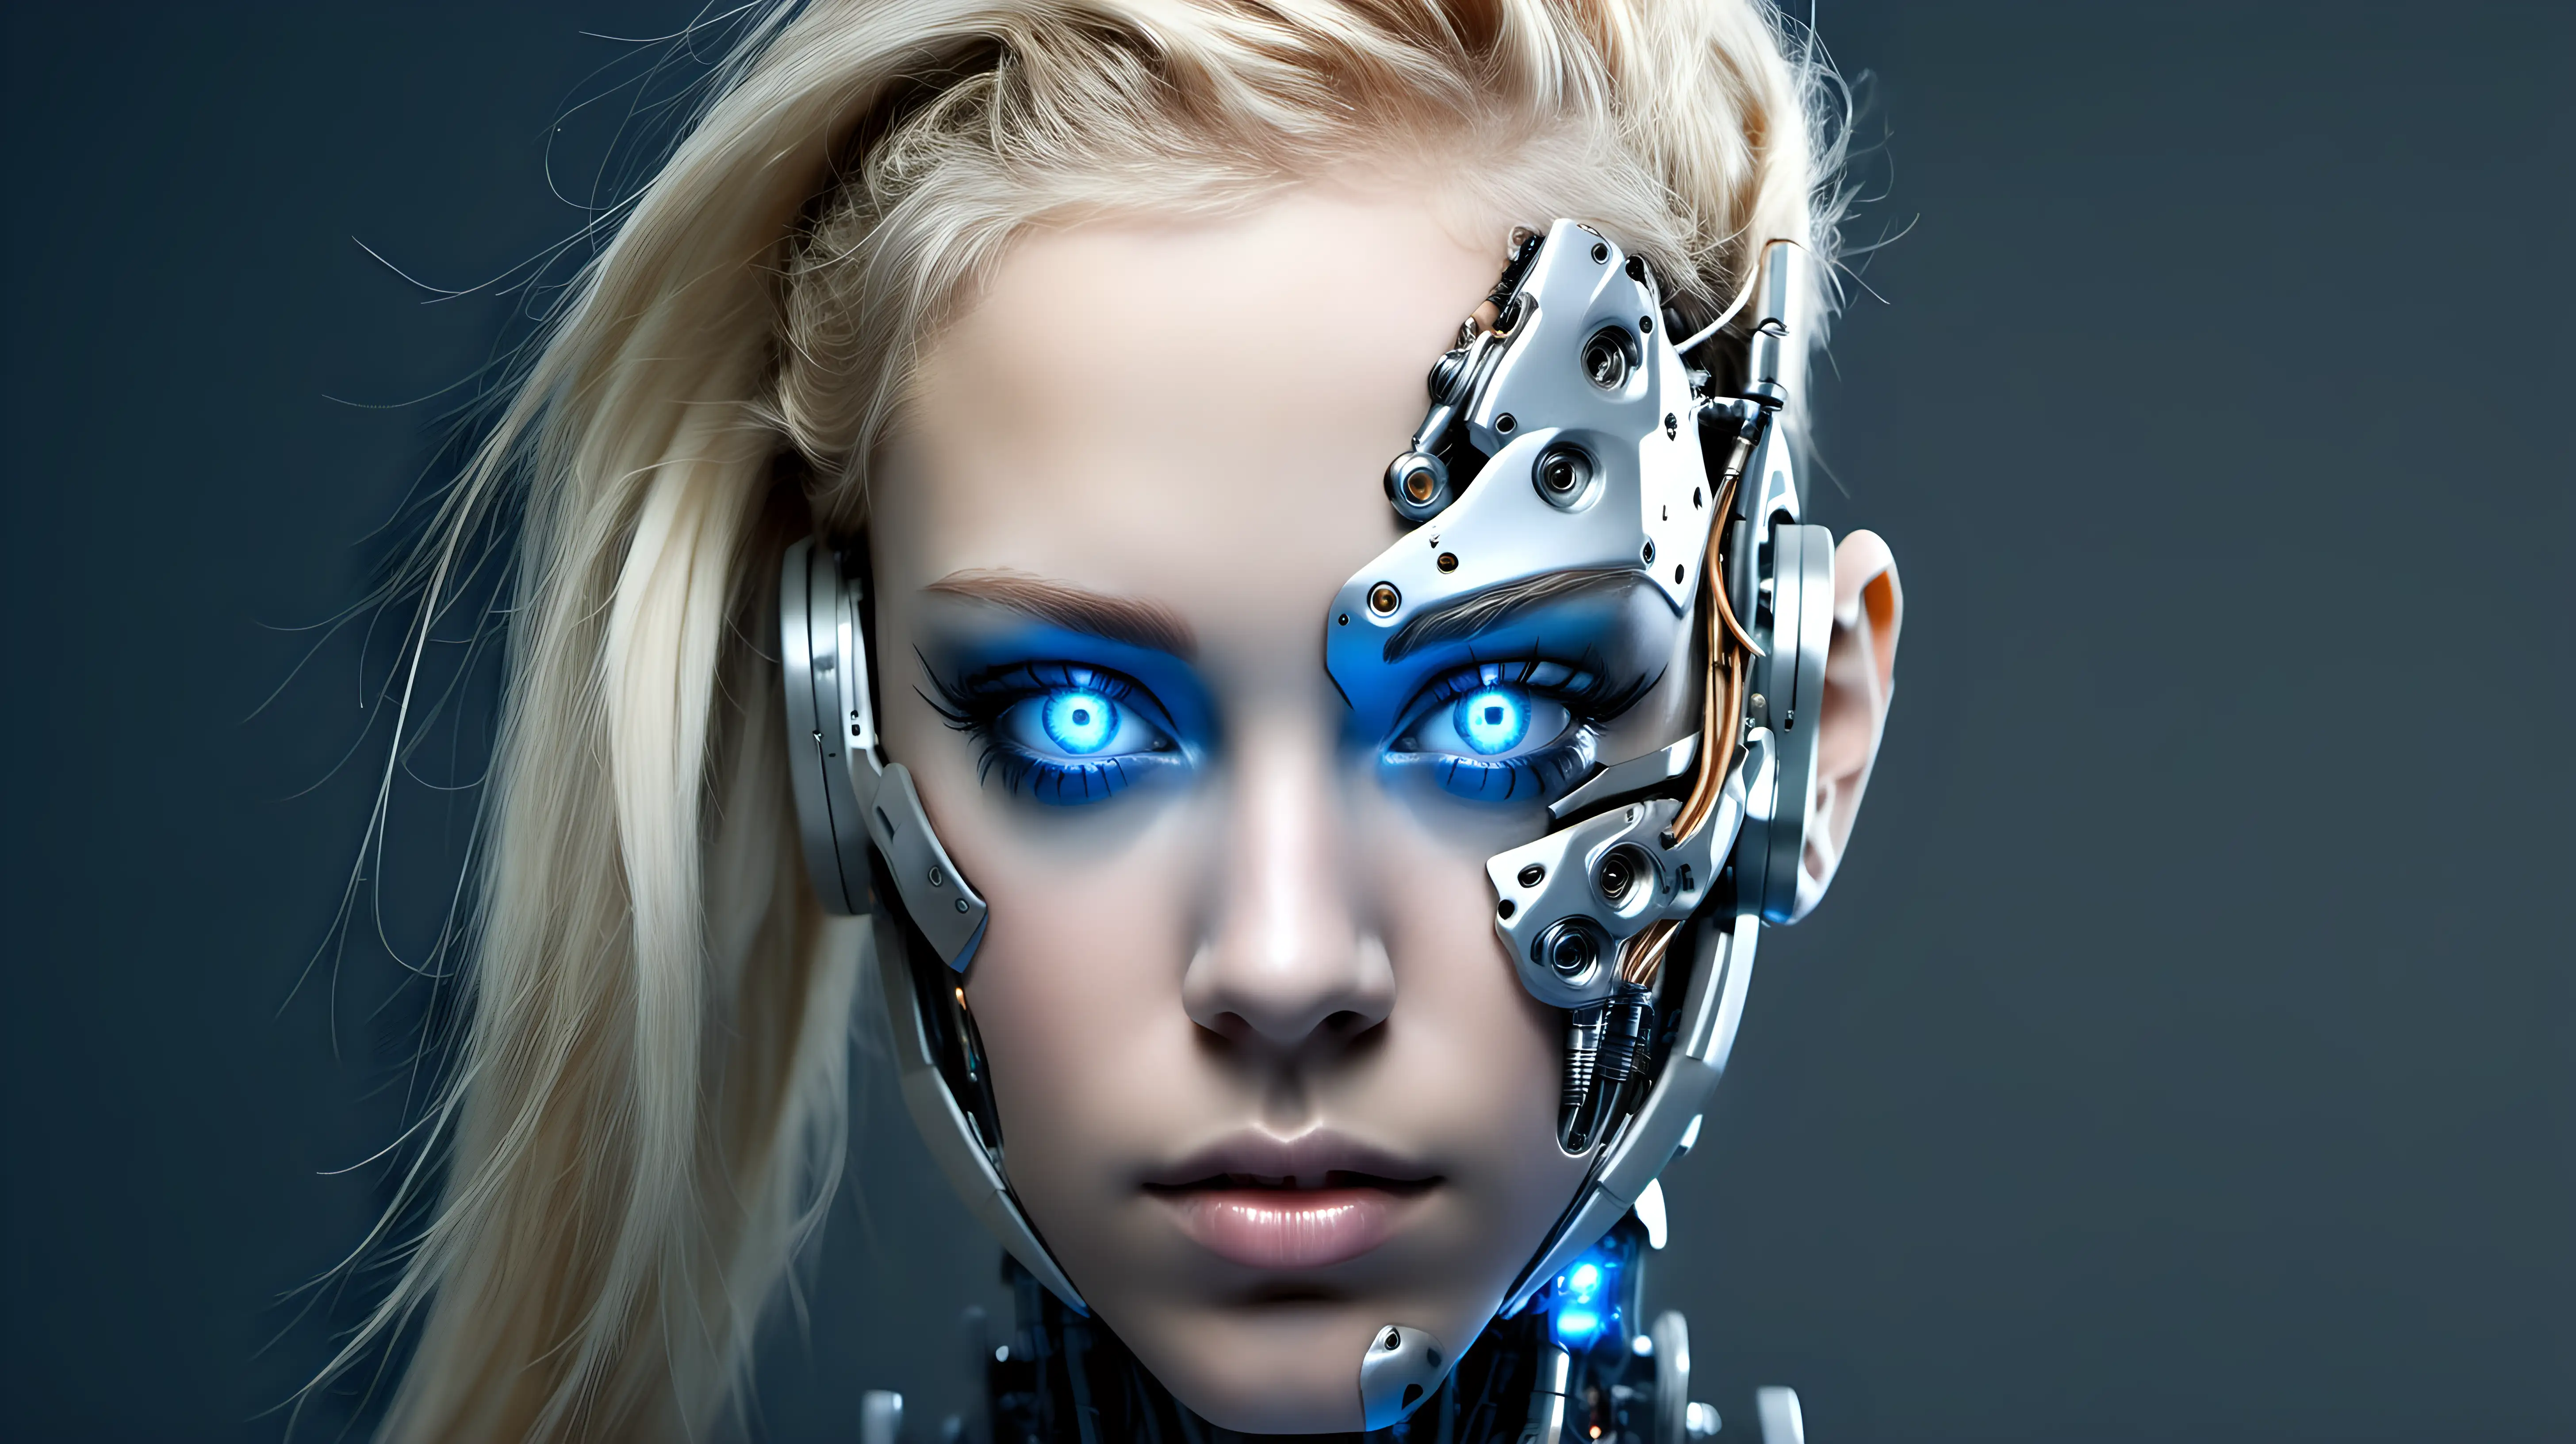 Beautiful Cyborg Woman with Blonde Hair and Blue Eyes